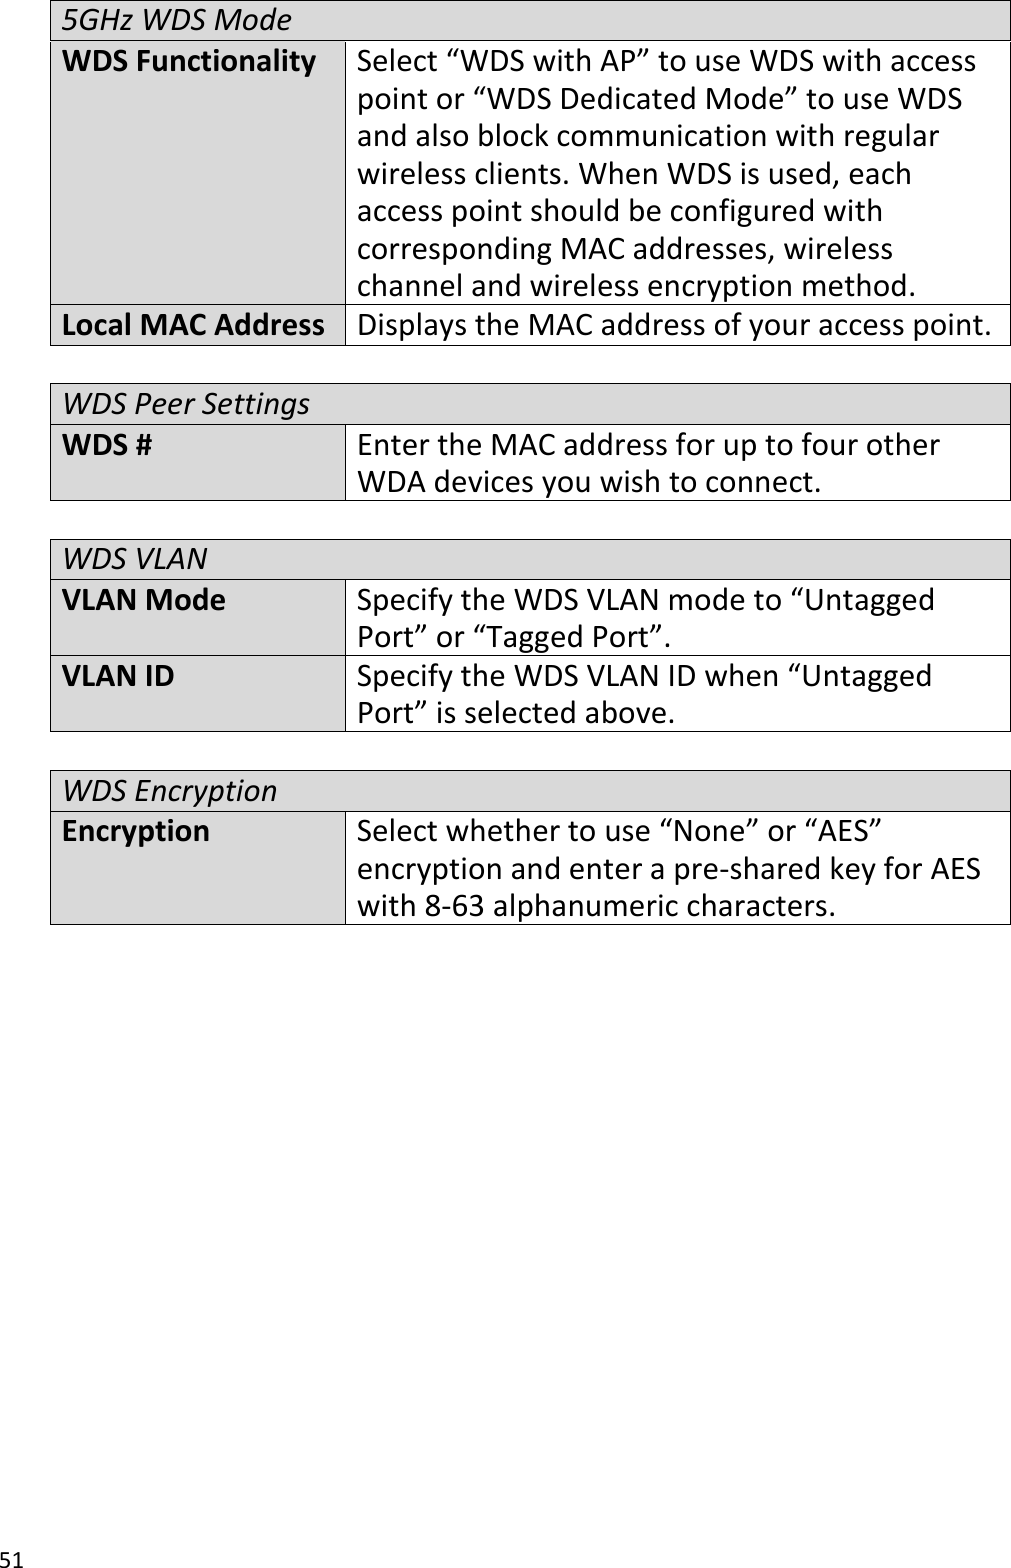 51  5GHz WDS Mode WDS Functionality Select “WDS with AP” to use WDS with access point or “WDS Dedicated Mode” to use WDS and also block communication with regular wireless clients. When WDS is used, each access point should be configured with corresponding MAC addresses, wireless channel and wireless encryption method. Local MAC Address Displays the MAC address of your access point.  WDS Peer Settings WDS # Enter the MAC address for up to four other WDA devices you wish to connect.  WDS VLAN VLAN Mode Specify the WDS VLAN mode to “Untagged Port” or “Tagged Port”. VLAN ID Specify the WDS VLAN ID when “Untagged Port” is selected above.  WDS Encryption Encryption Select whether to use “None” or “AES” encryption and enter a pre-shared key for AES with 8-63 alphanumeric characters.              